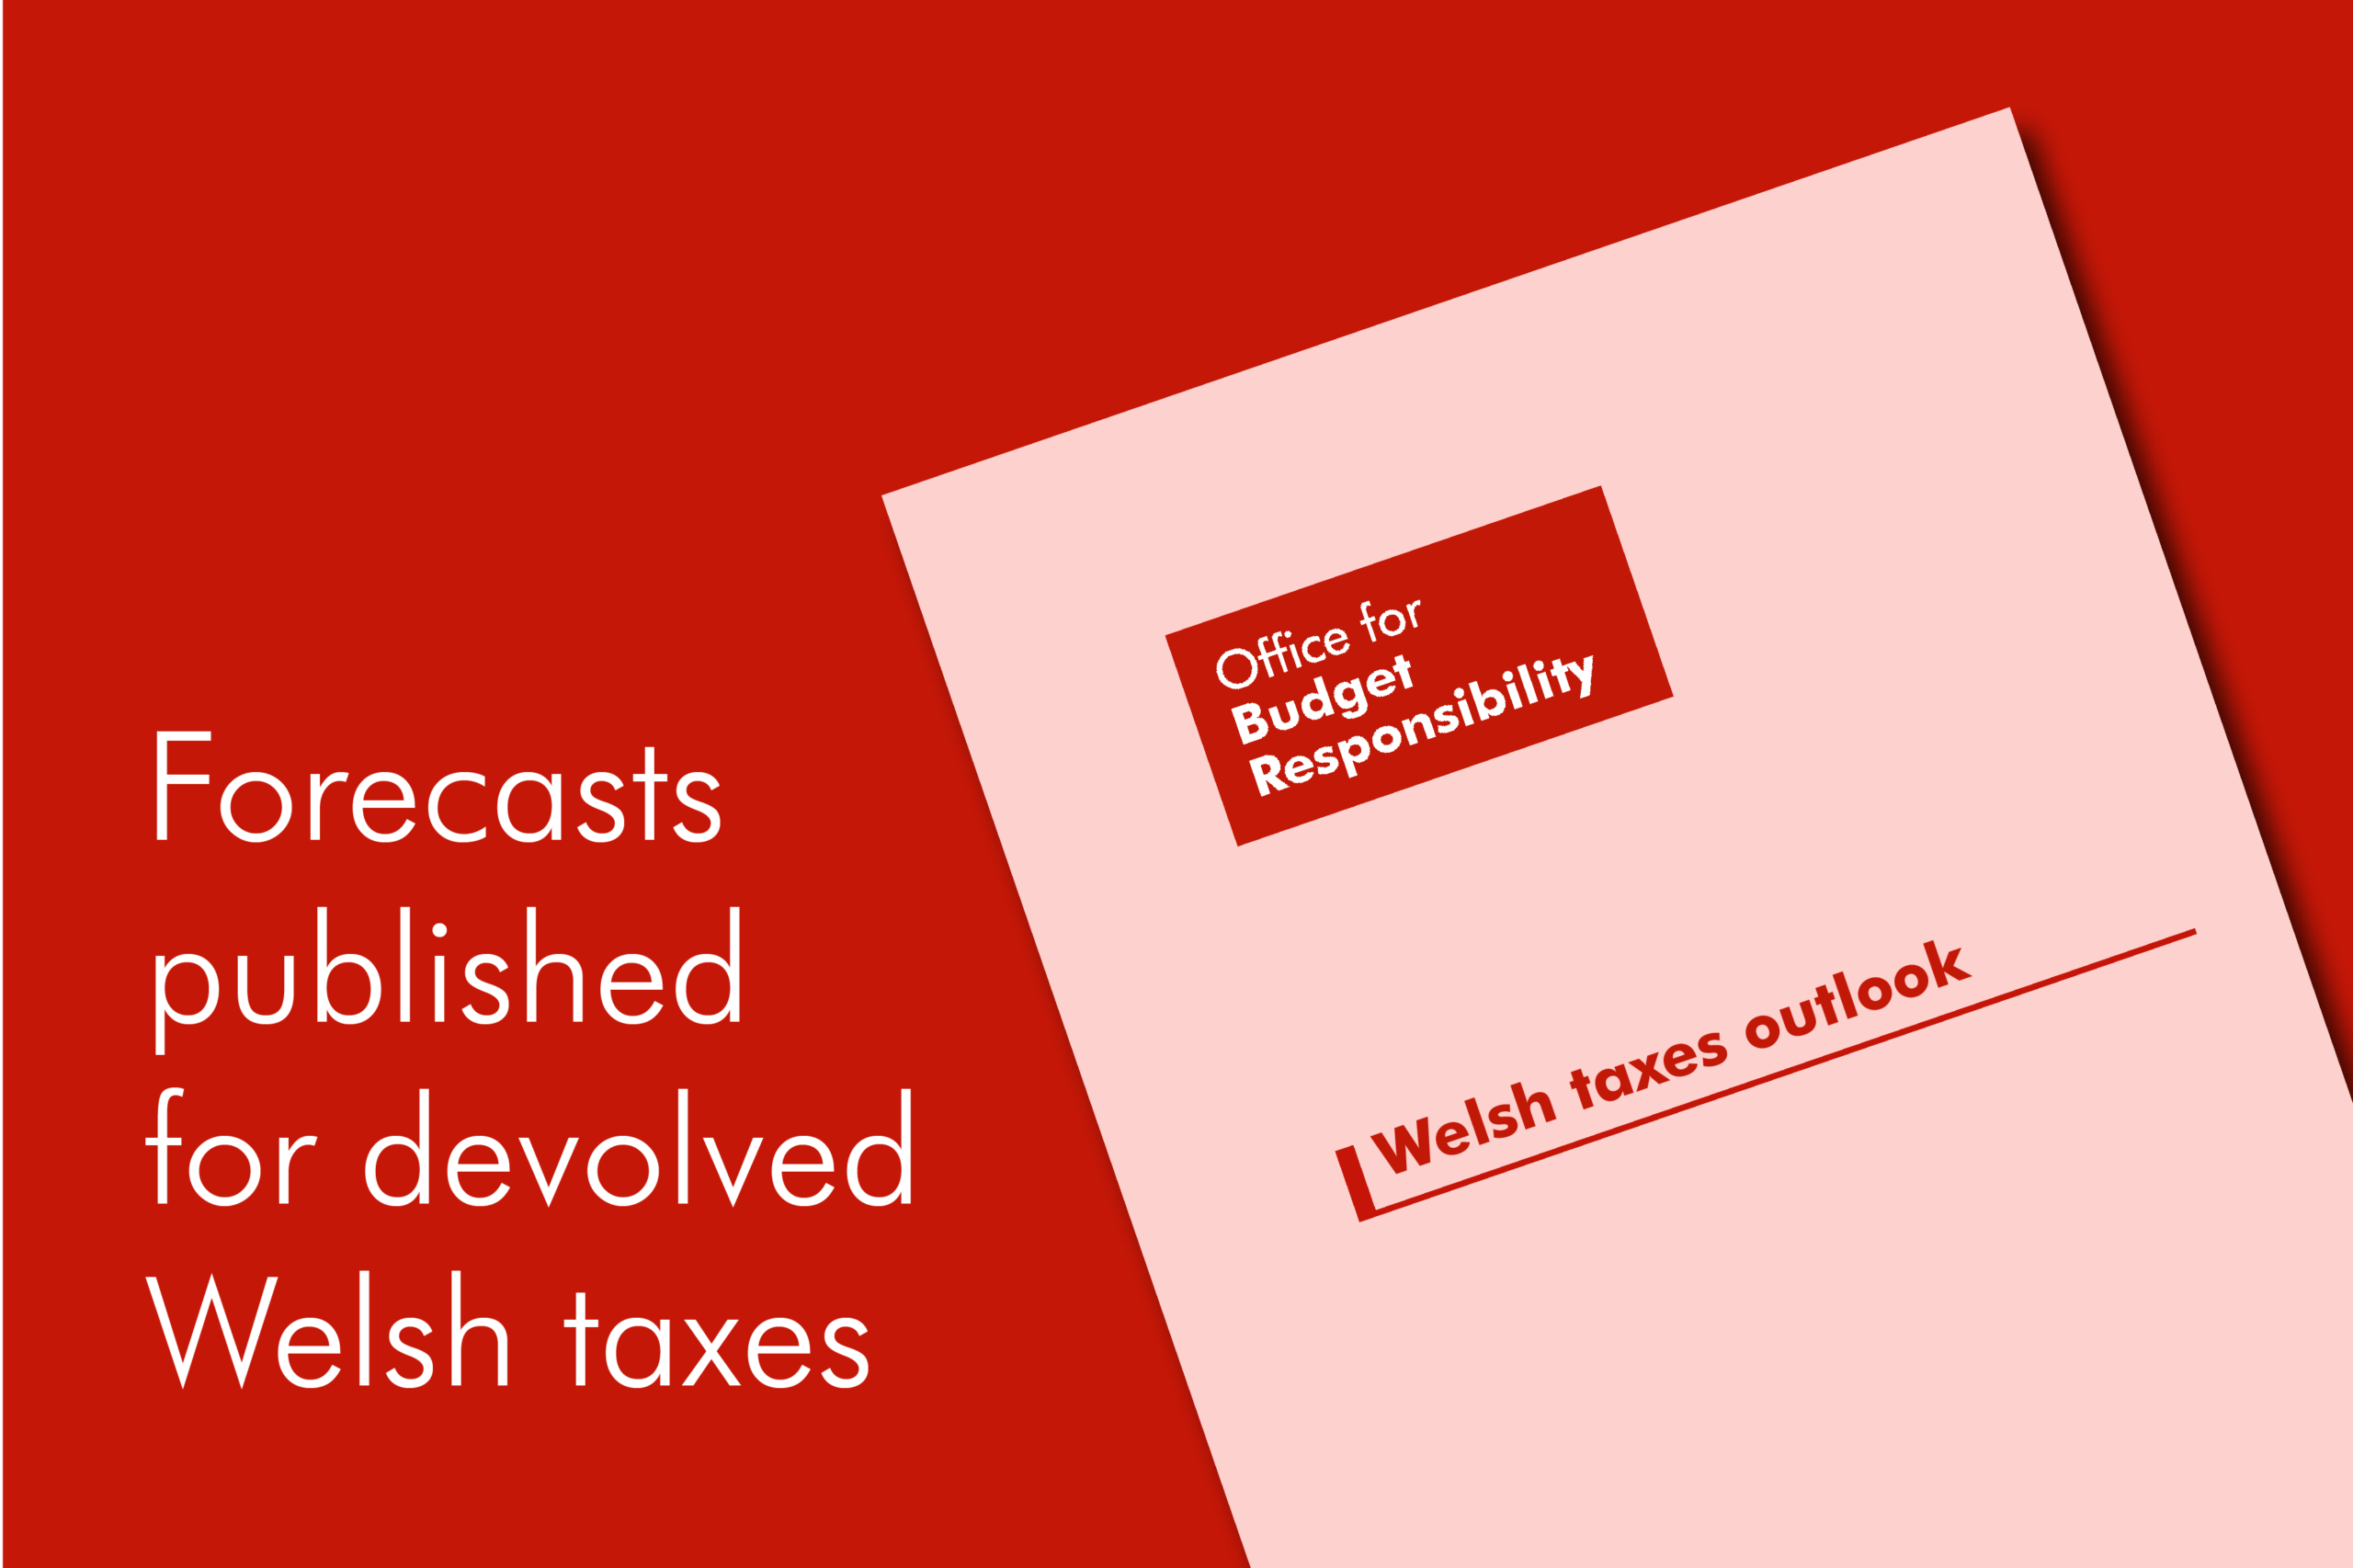 Welsh taxes outlook